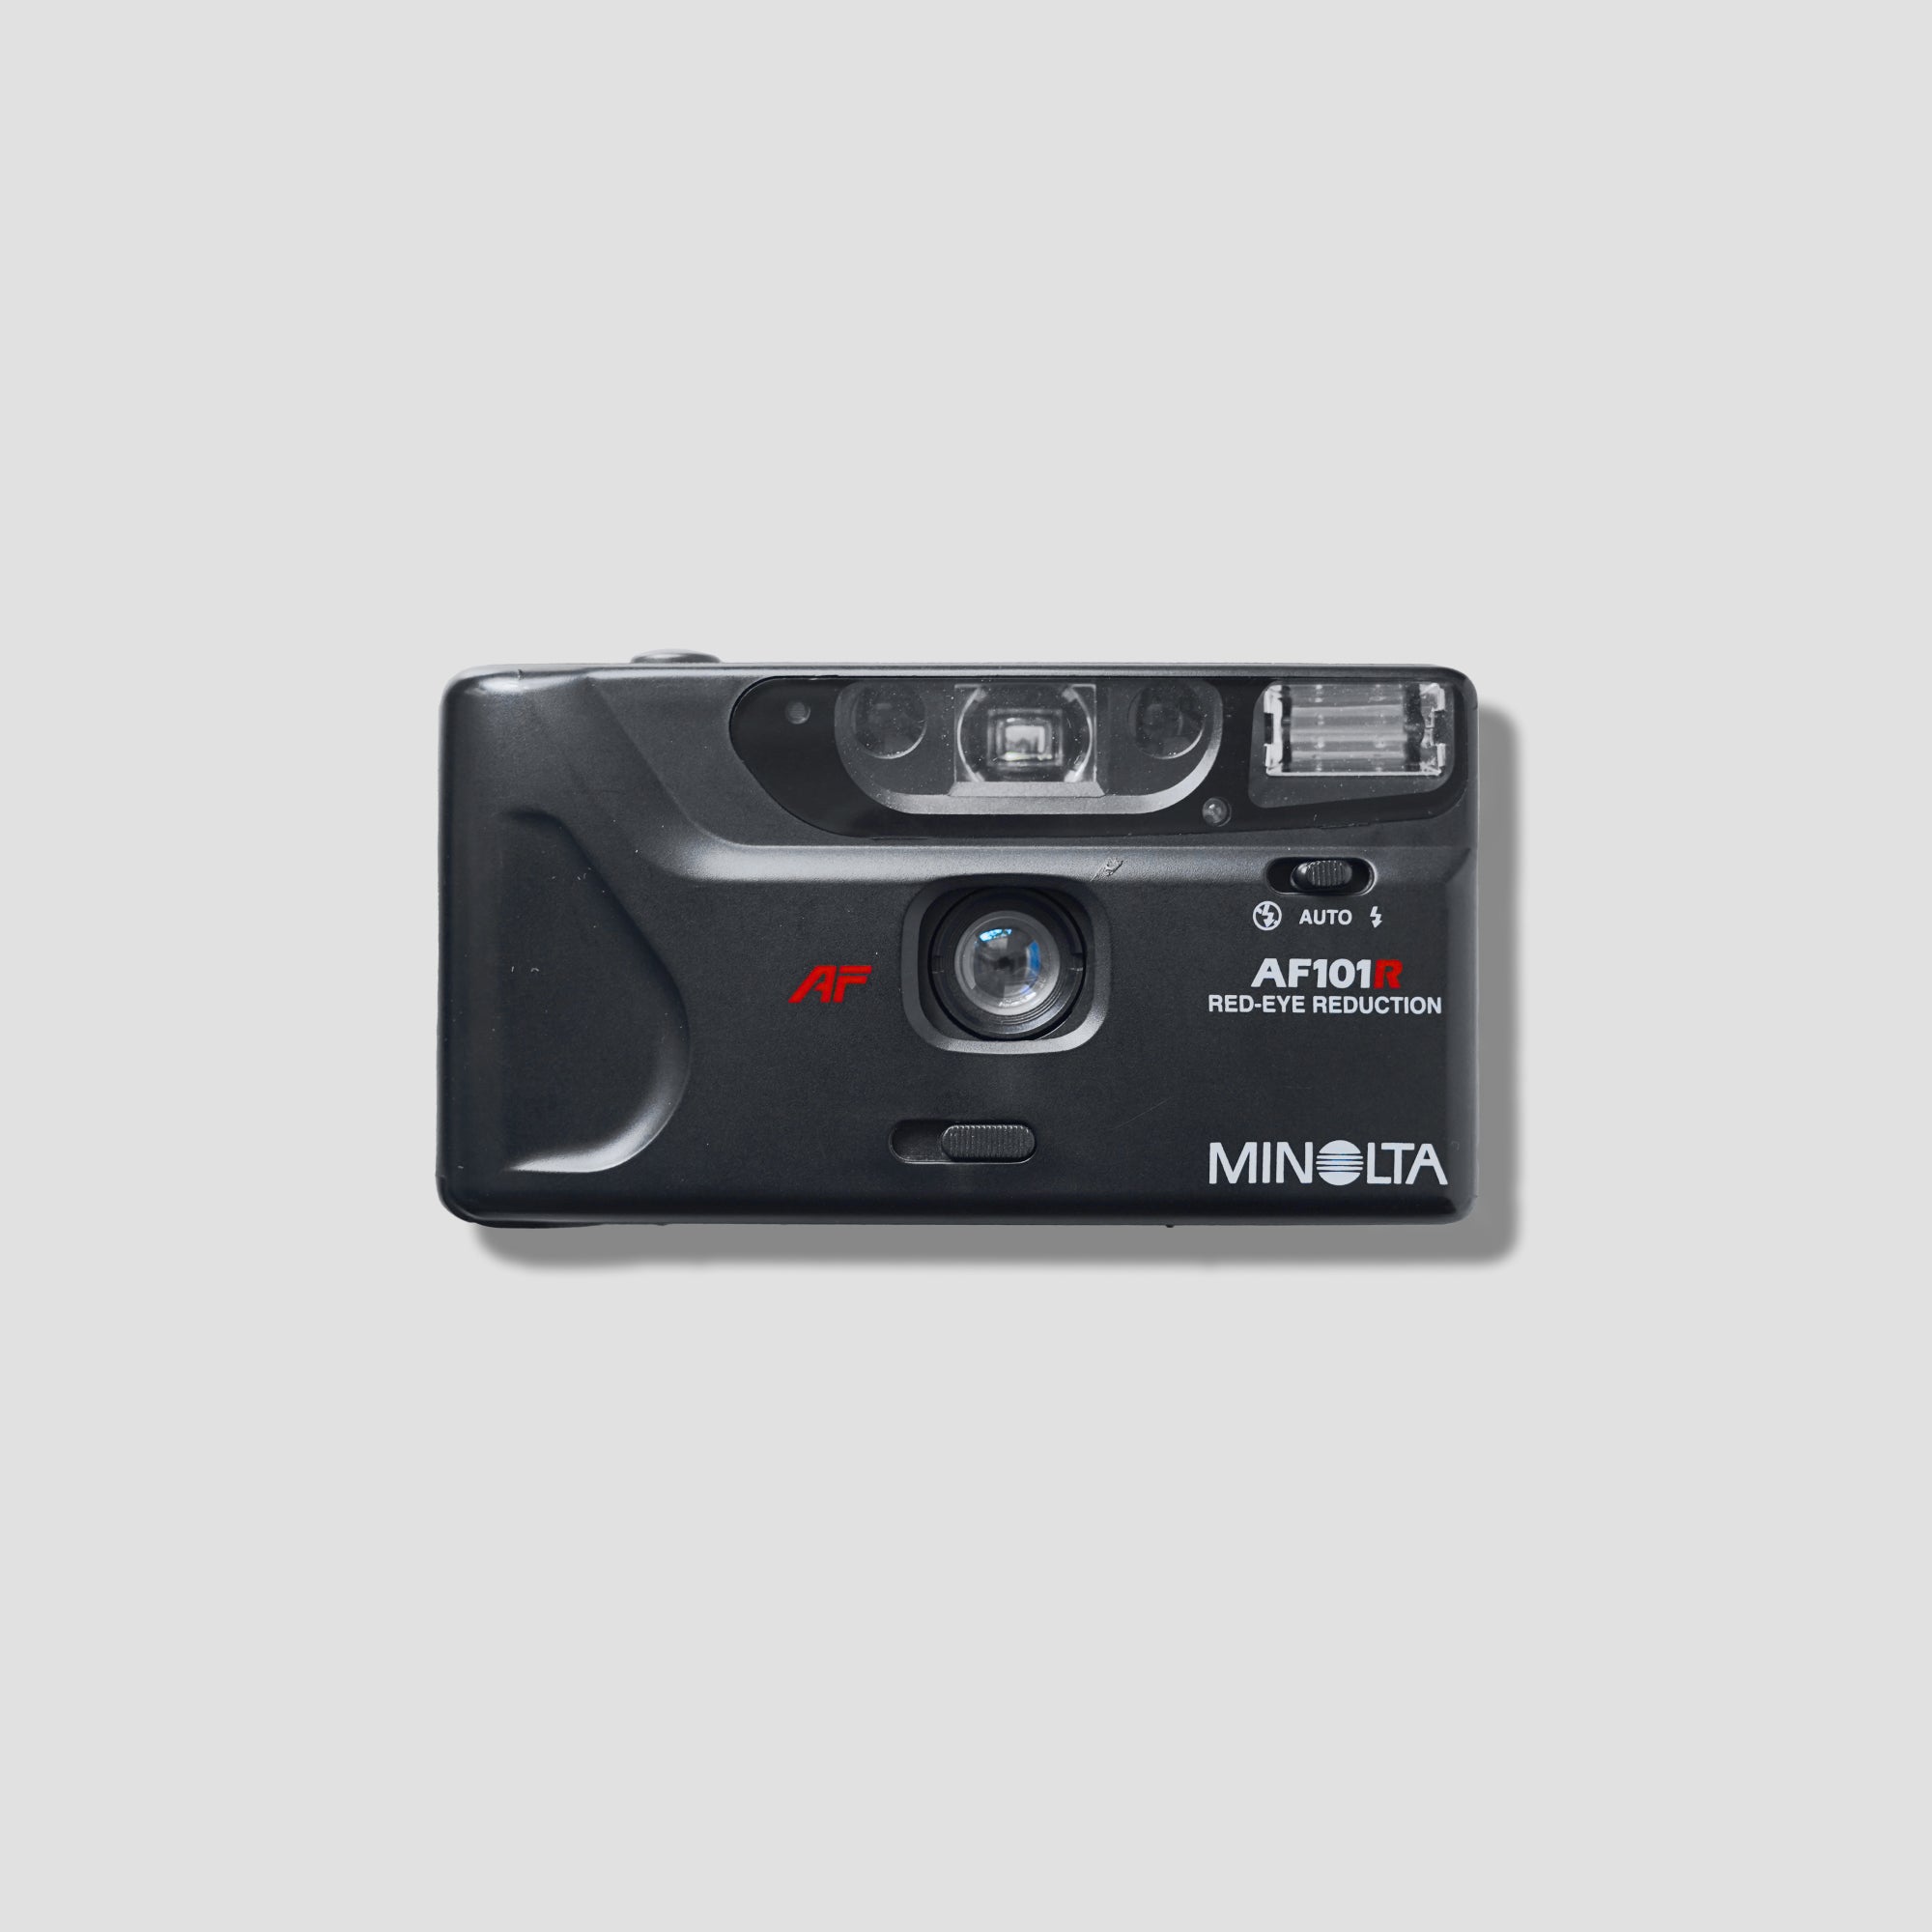 Buy Minolta AF101R now at Analogue Amsterdam